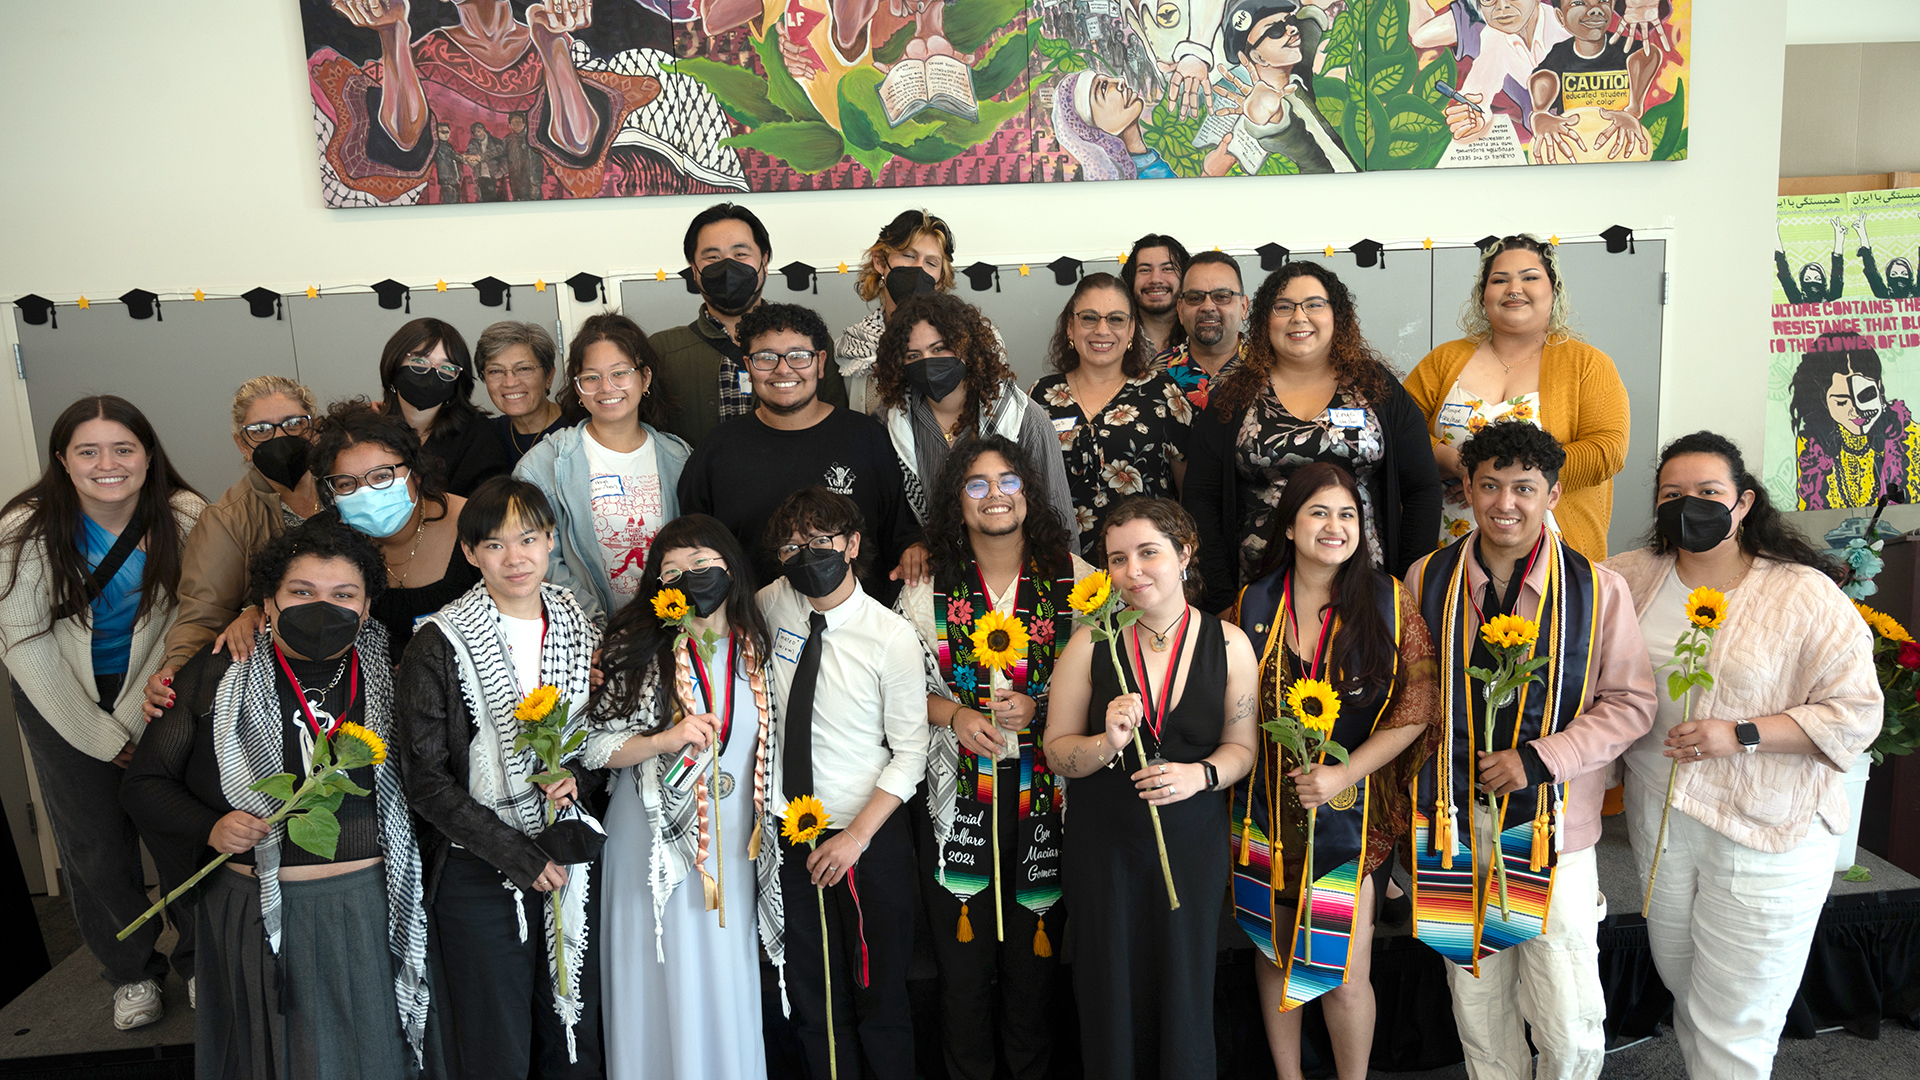 About 30 students, staff and faculty connected with Berkeley's Multicultural Community Center pose for a group photo